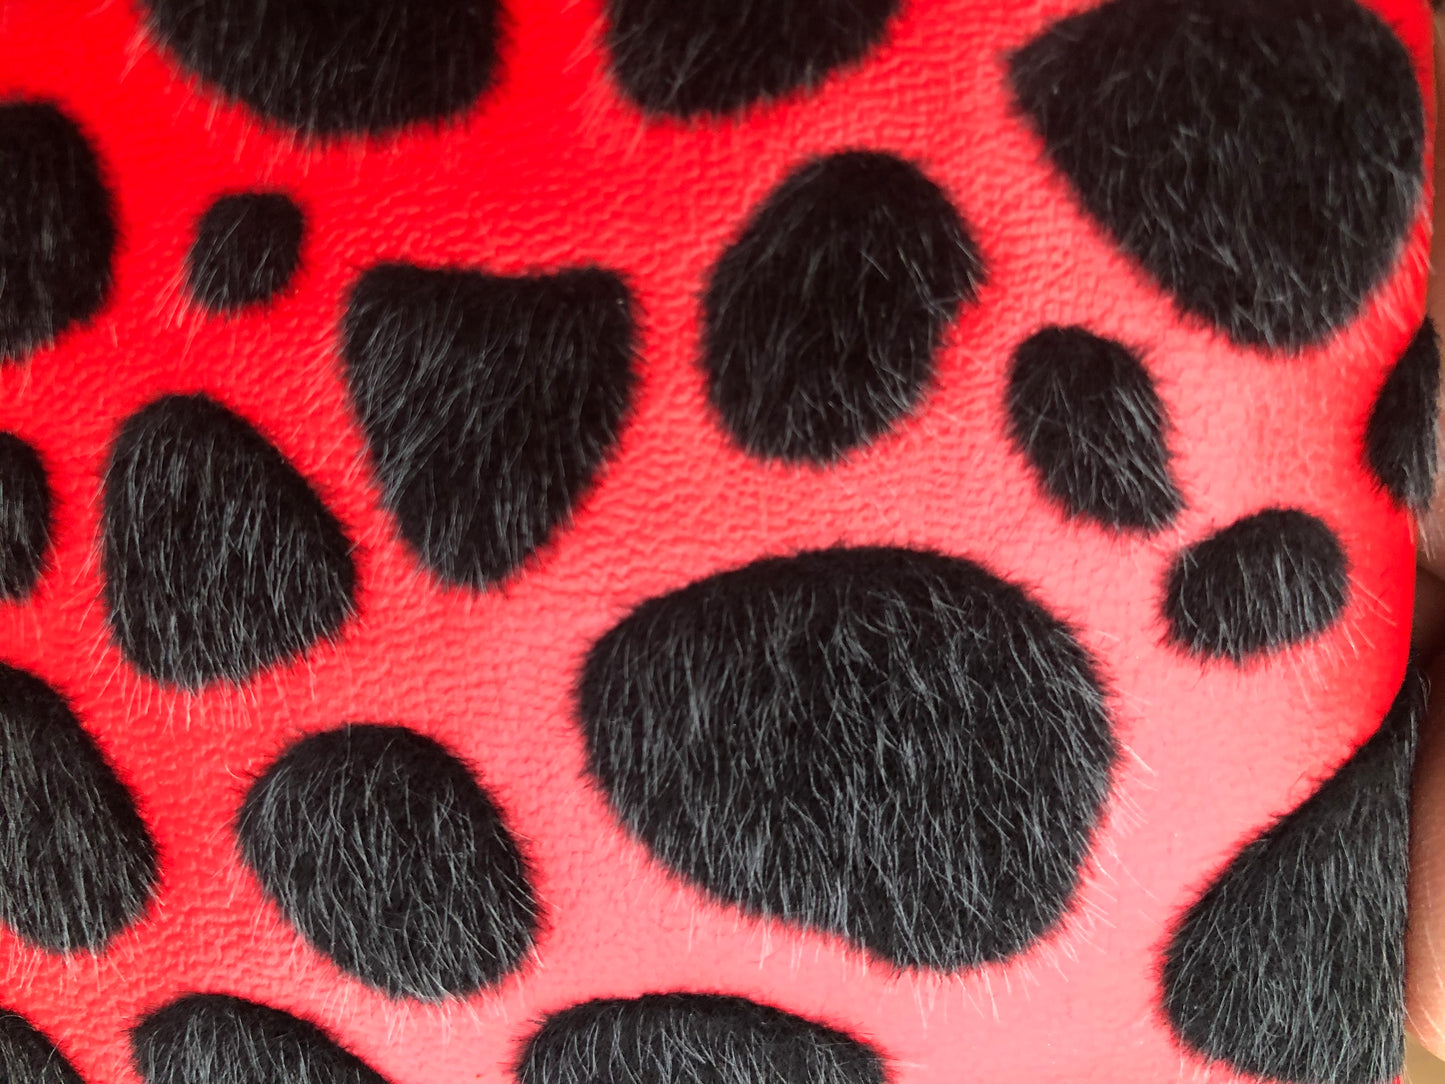 Textured faux leather, cheetah patterned vinyl, textured vinyl, synthetic leather with fur spots, Vegan Pleather, artificial leather for bags, garments, and upholstery by the meter